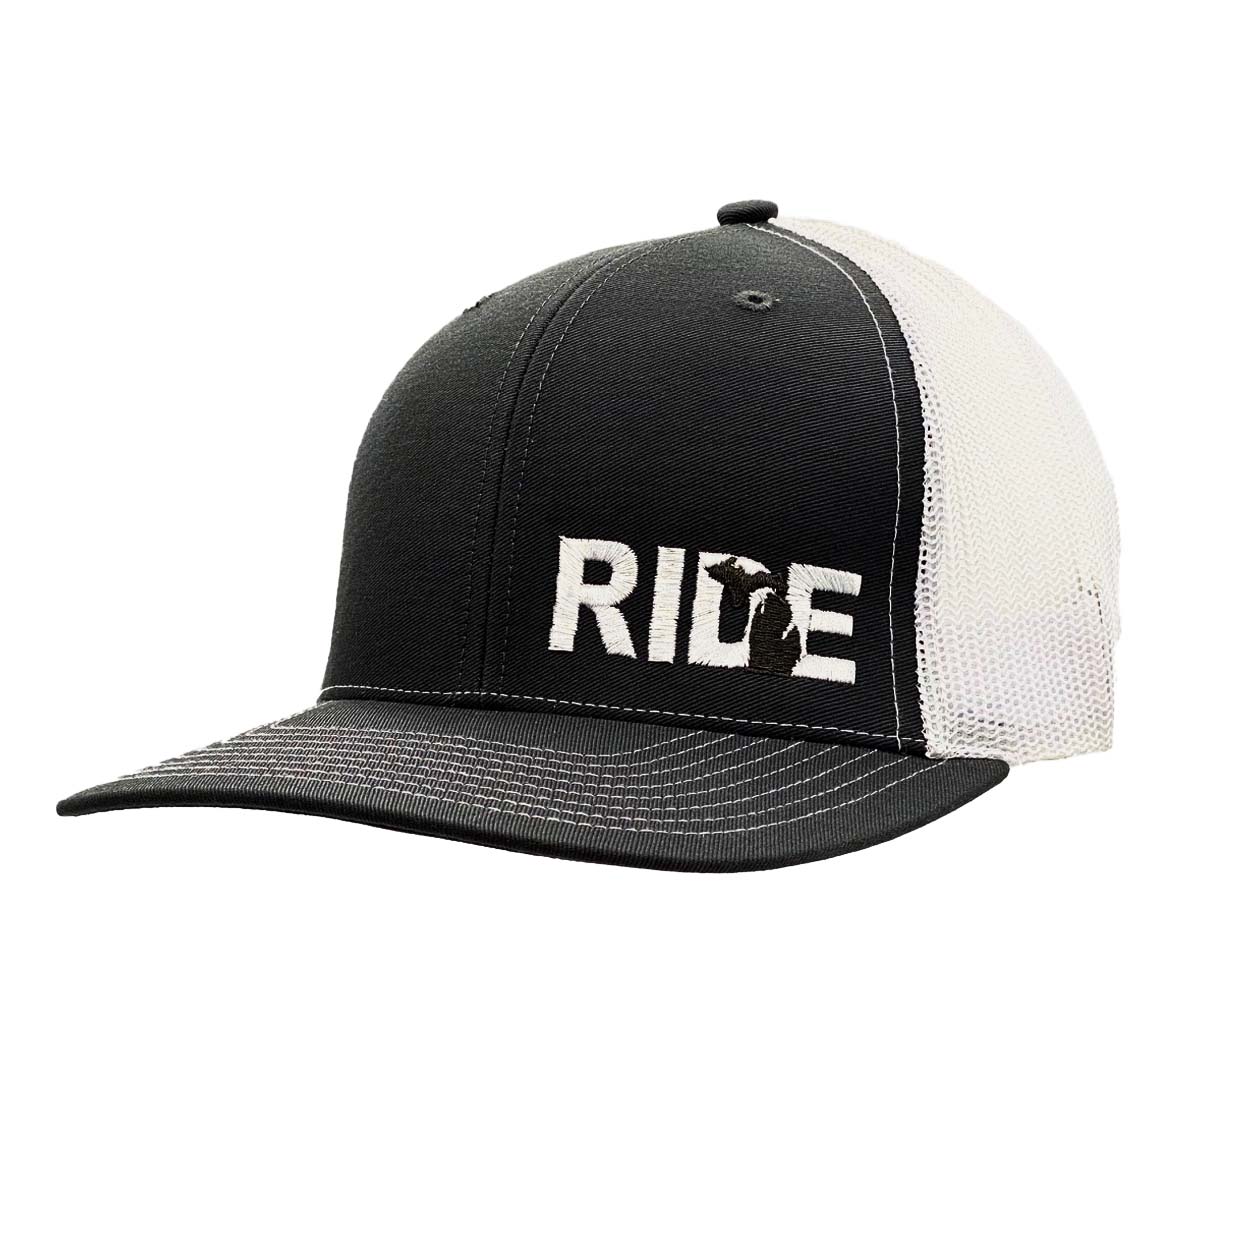 Ride Michigan Night Out Embroidered Snapback Trucker Hat Black/Gray